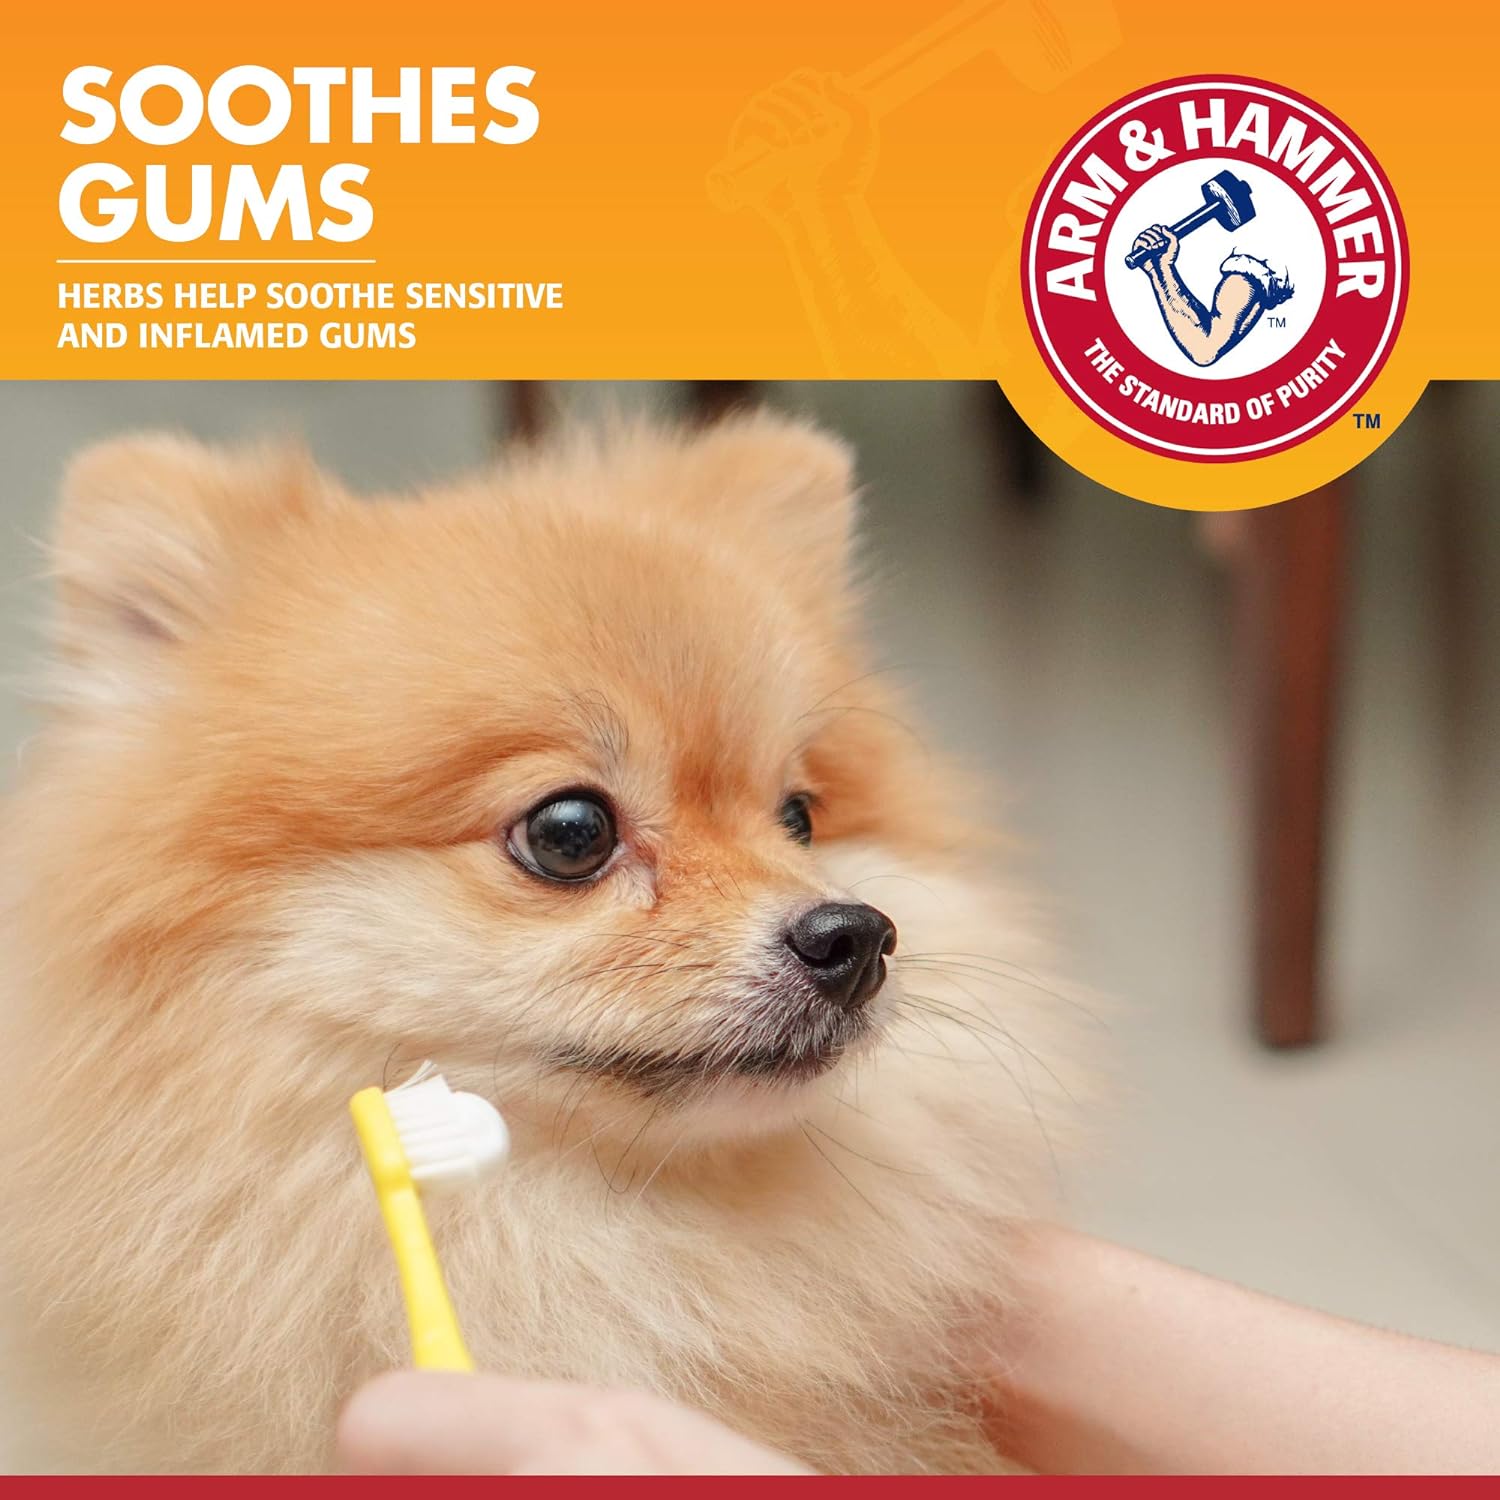 Arm & Hammer for Pets Clinical Care Enzymatic Toothpaste for Dogs | Soothes Inflamed Gums | Dog Toothpaste Enzymatic, Chicken Flavor, 2.5 Oz | Arm and Hammer Toothpaste for Dogs, Dog Dental Care : Pet Toothpastes : Pet Supplies